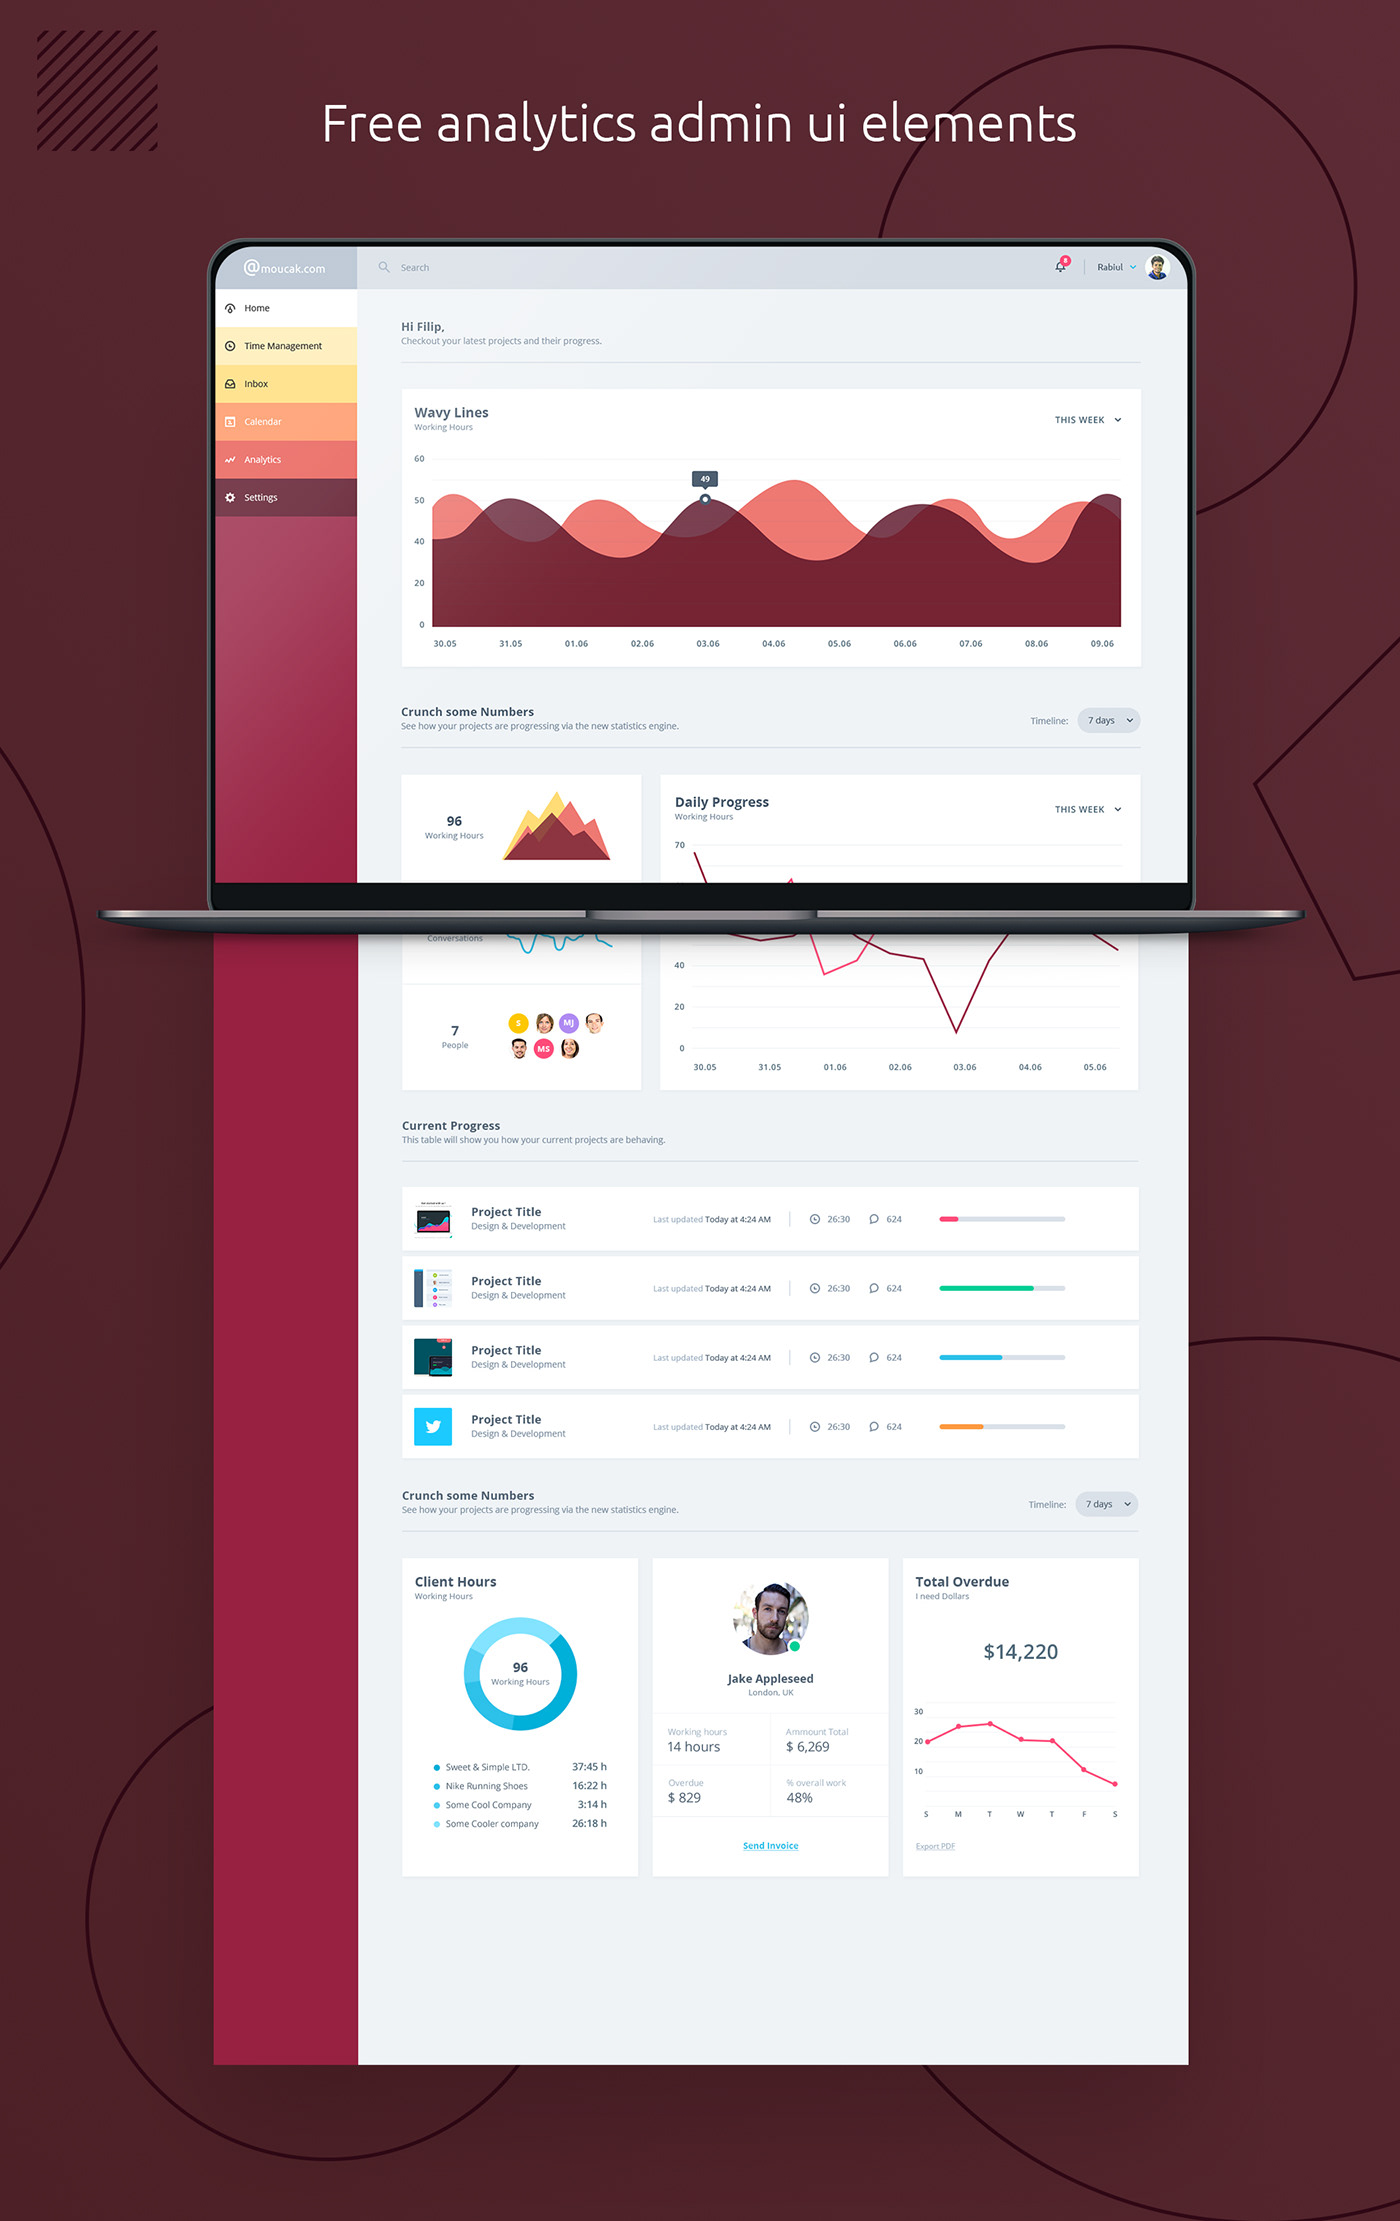 admin analytics download free template UI ui kits user experience user interface ux